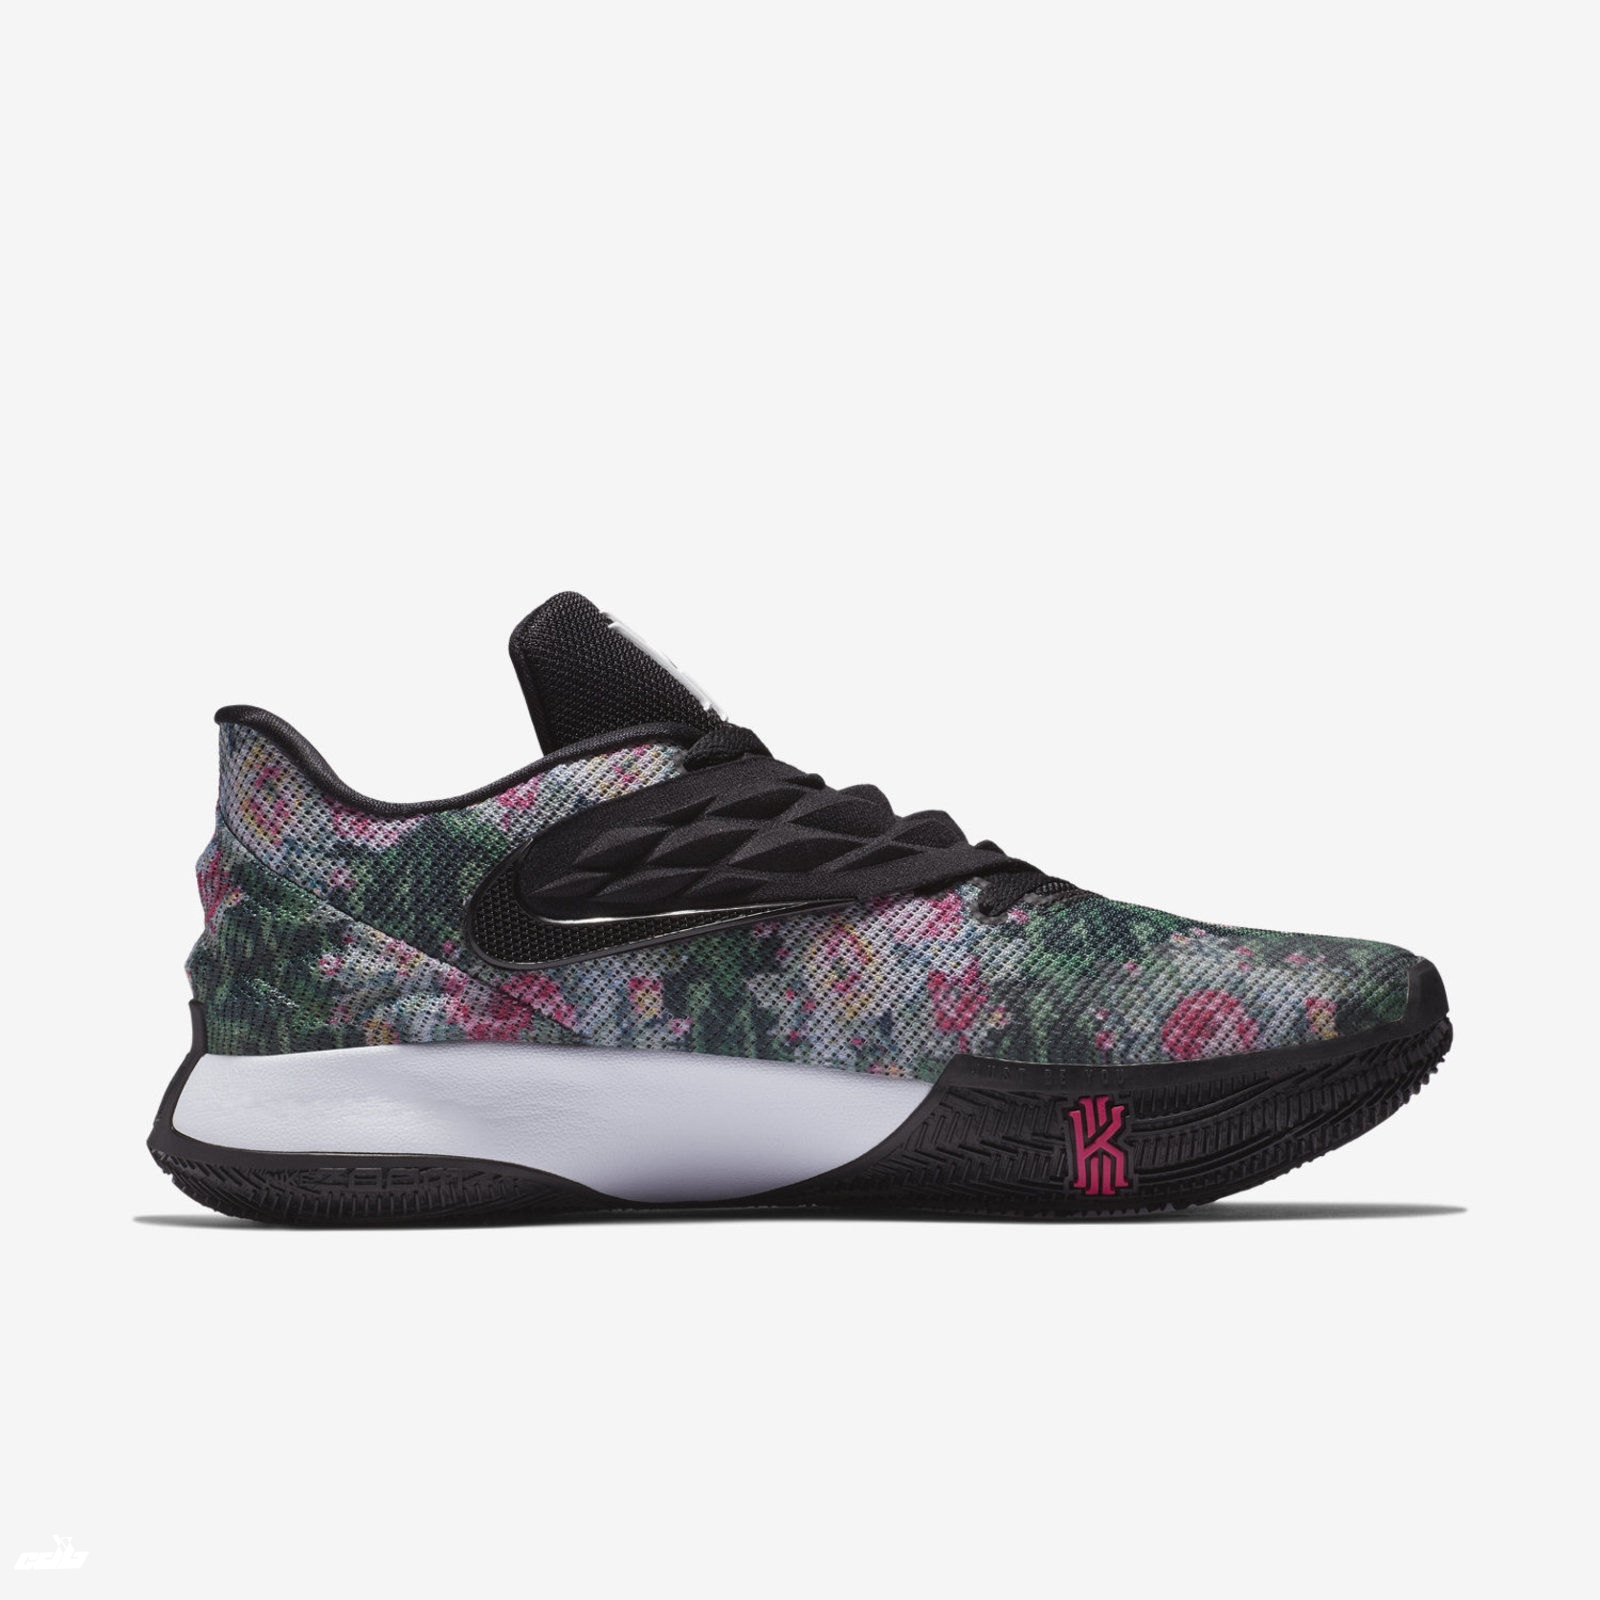 Achat / Vente Nike Kyrie Irving I 1 Low Floral Noir (ao8980-002 ...